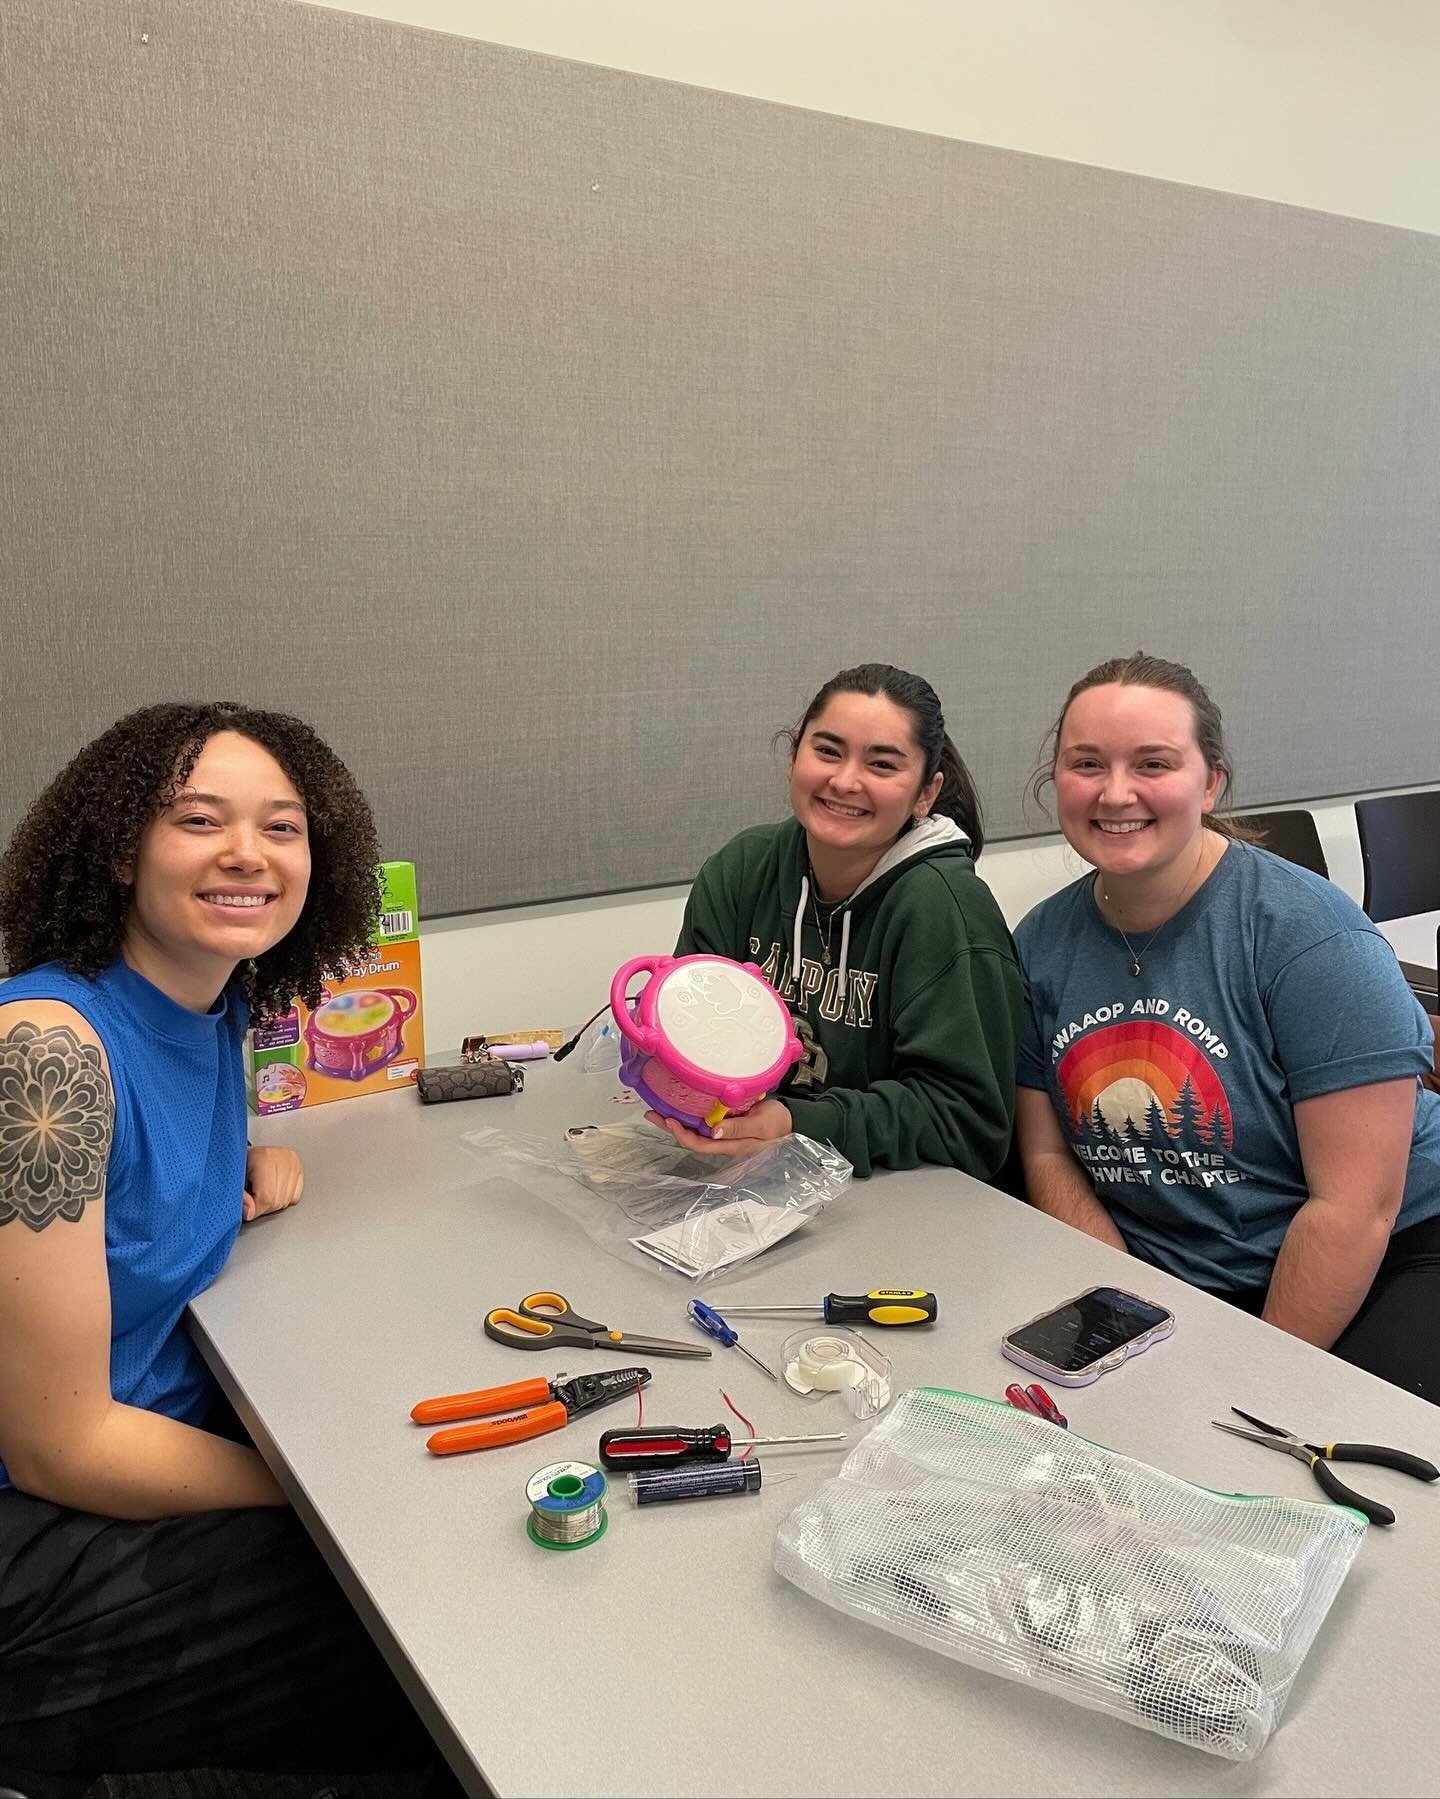 We recently had a toy adaptation event where attendees successfully adapted eight toys! Some fun toys we adapted included a pair of walkie talkies, dice rollers, and a colorful gear plane. Thank you to everyone who attended! Stay tuned for our next e